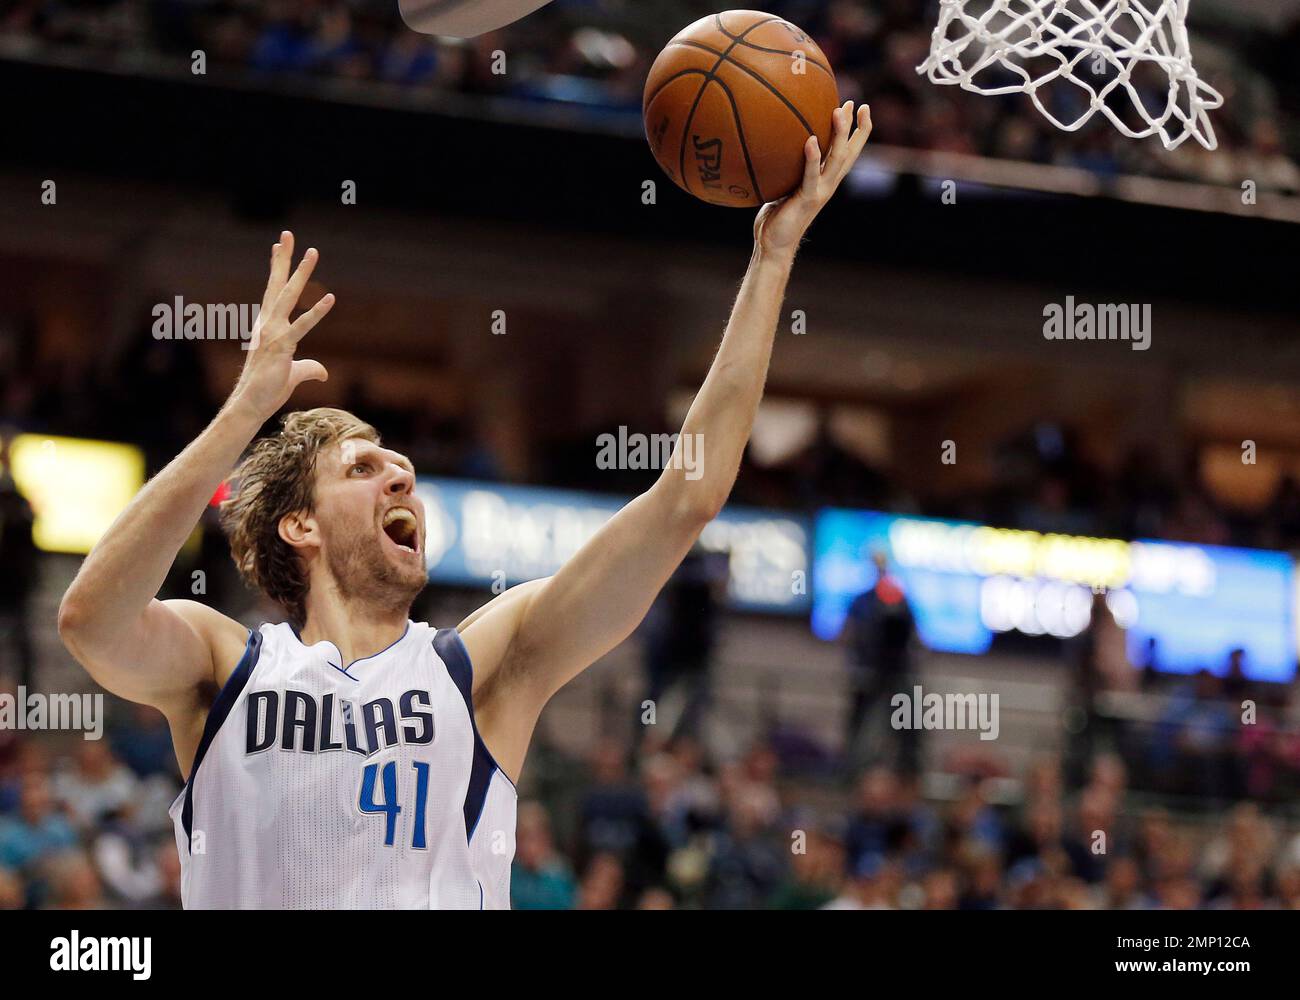 FILE - In this March 20, 2016, file photo, Dallas Mavericks Dirk Nowitzki (41) attempts a layup during the second half of an NBA basketball game against the Portland Trail Blazers